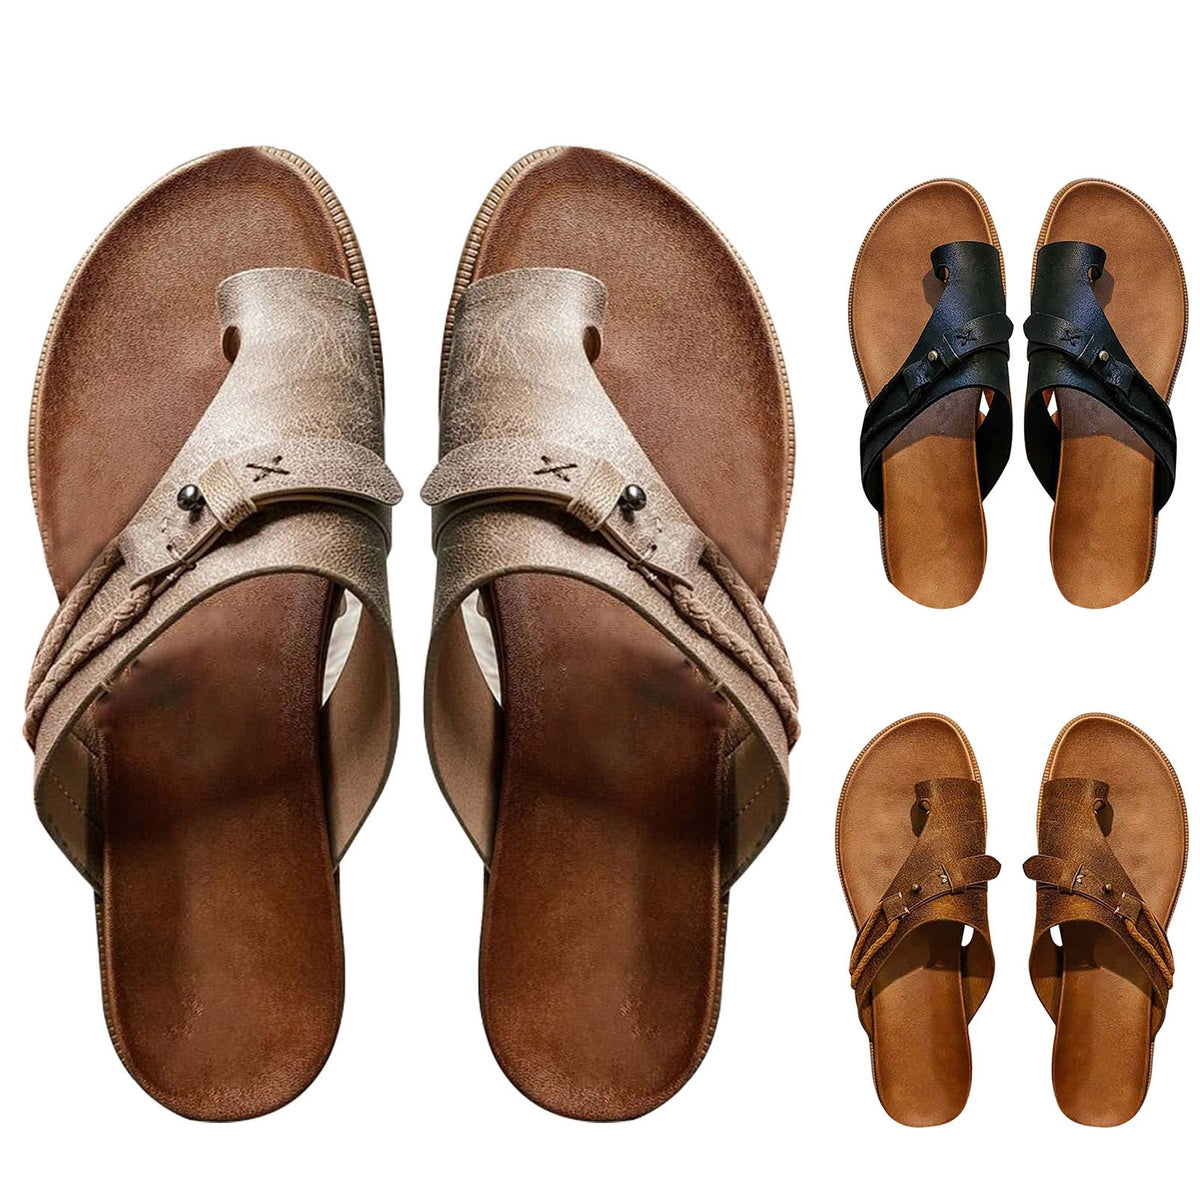 Open Toe Sandals for Bunions and Hammertoes - ComfyFootgear